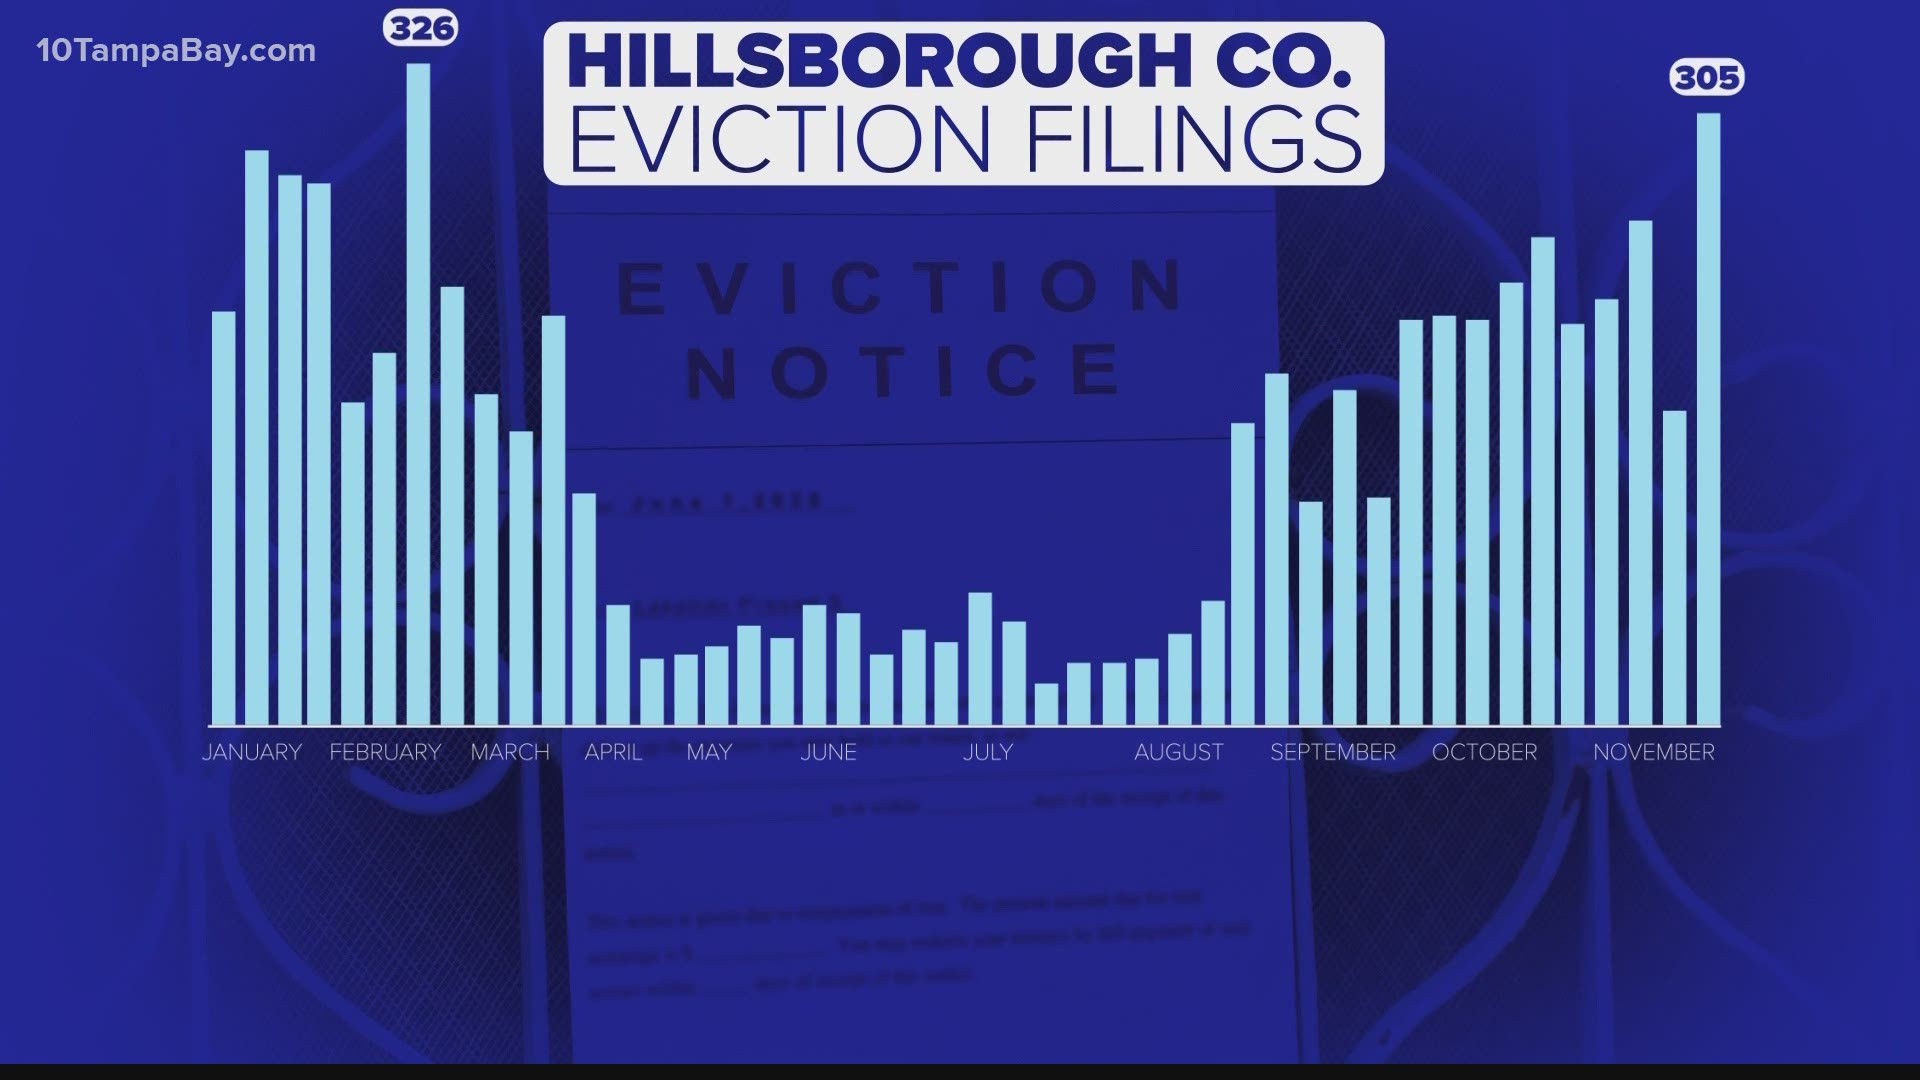 New data shows eviction cases are at their highest level since the coronavirus pandemic began.